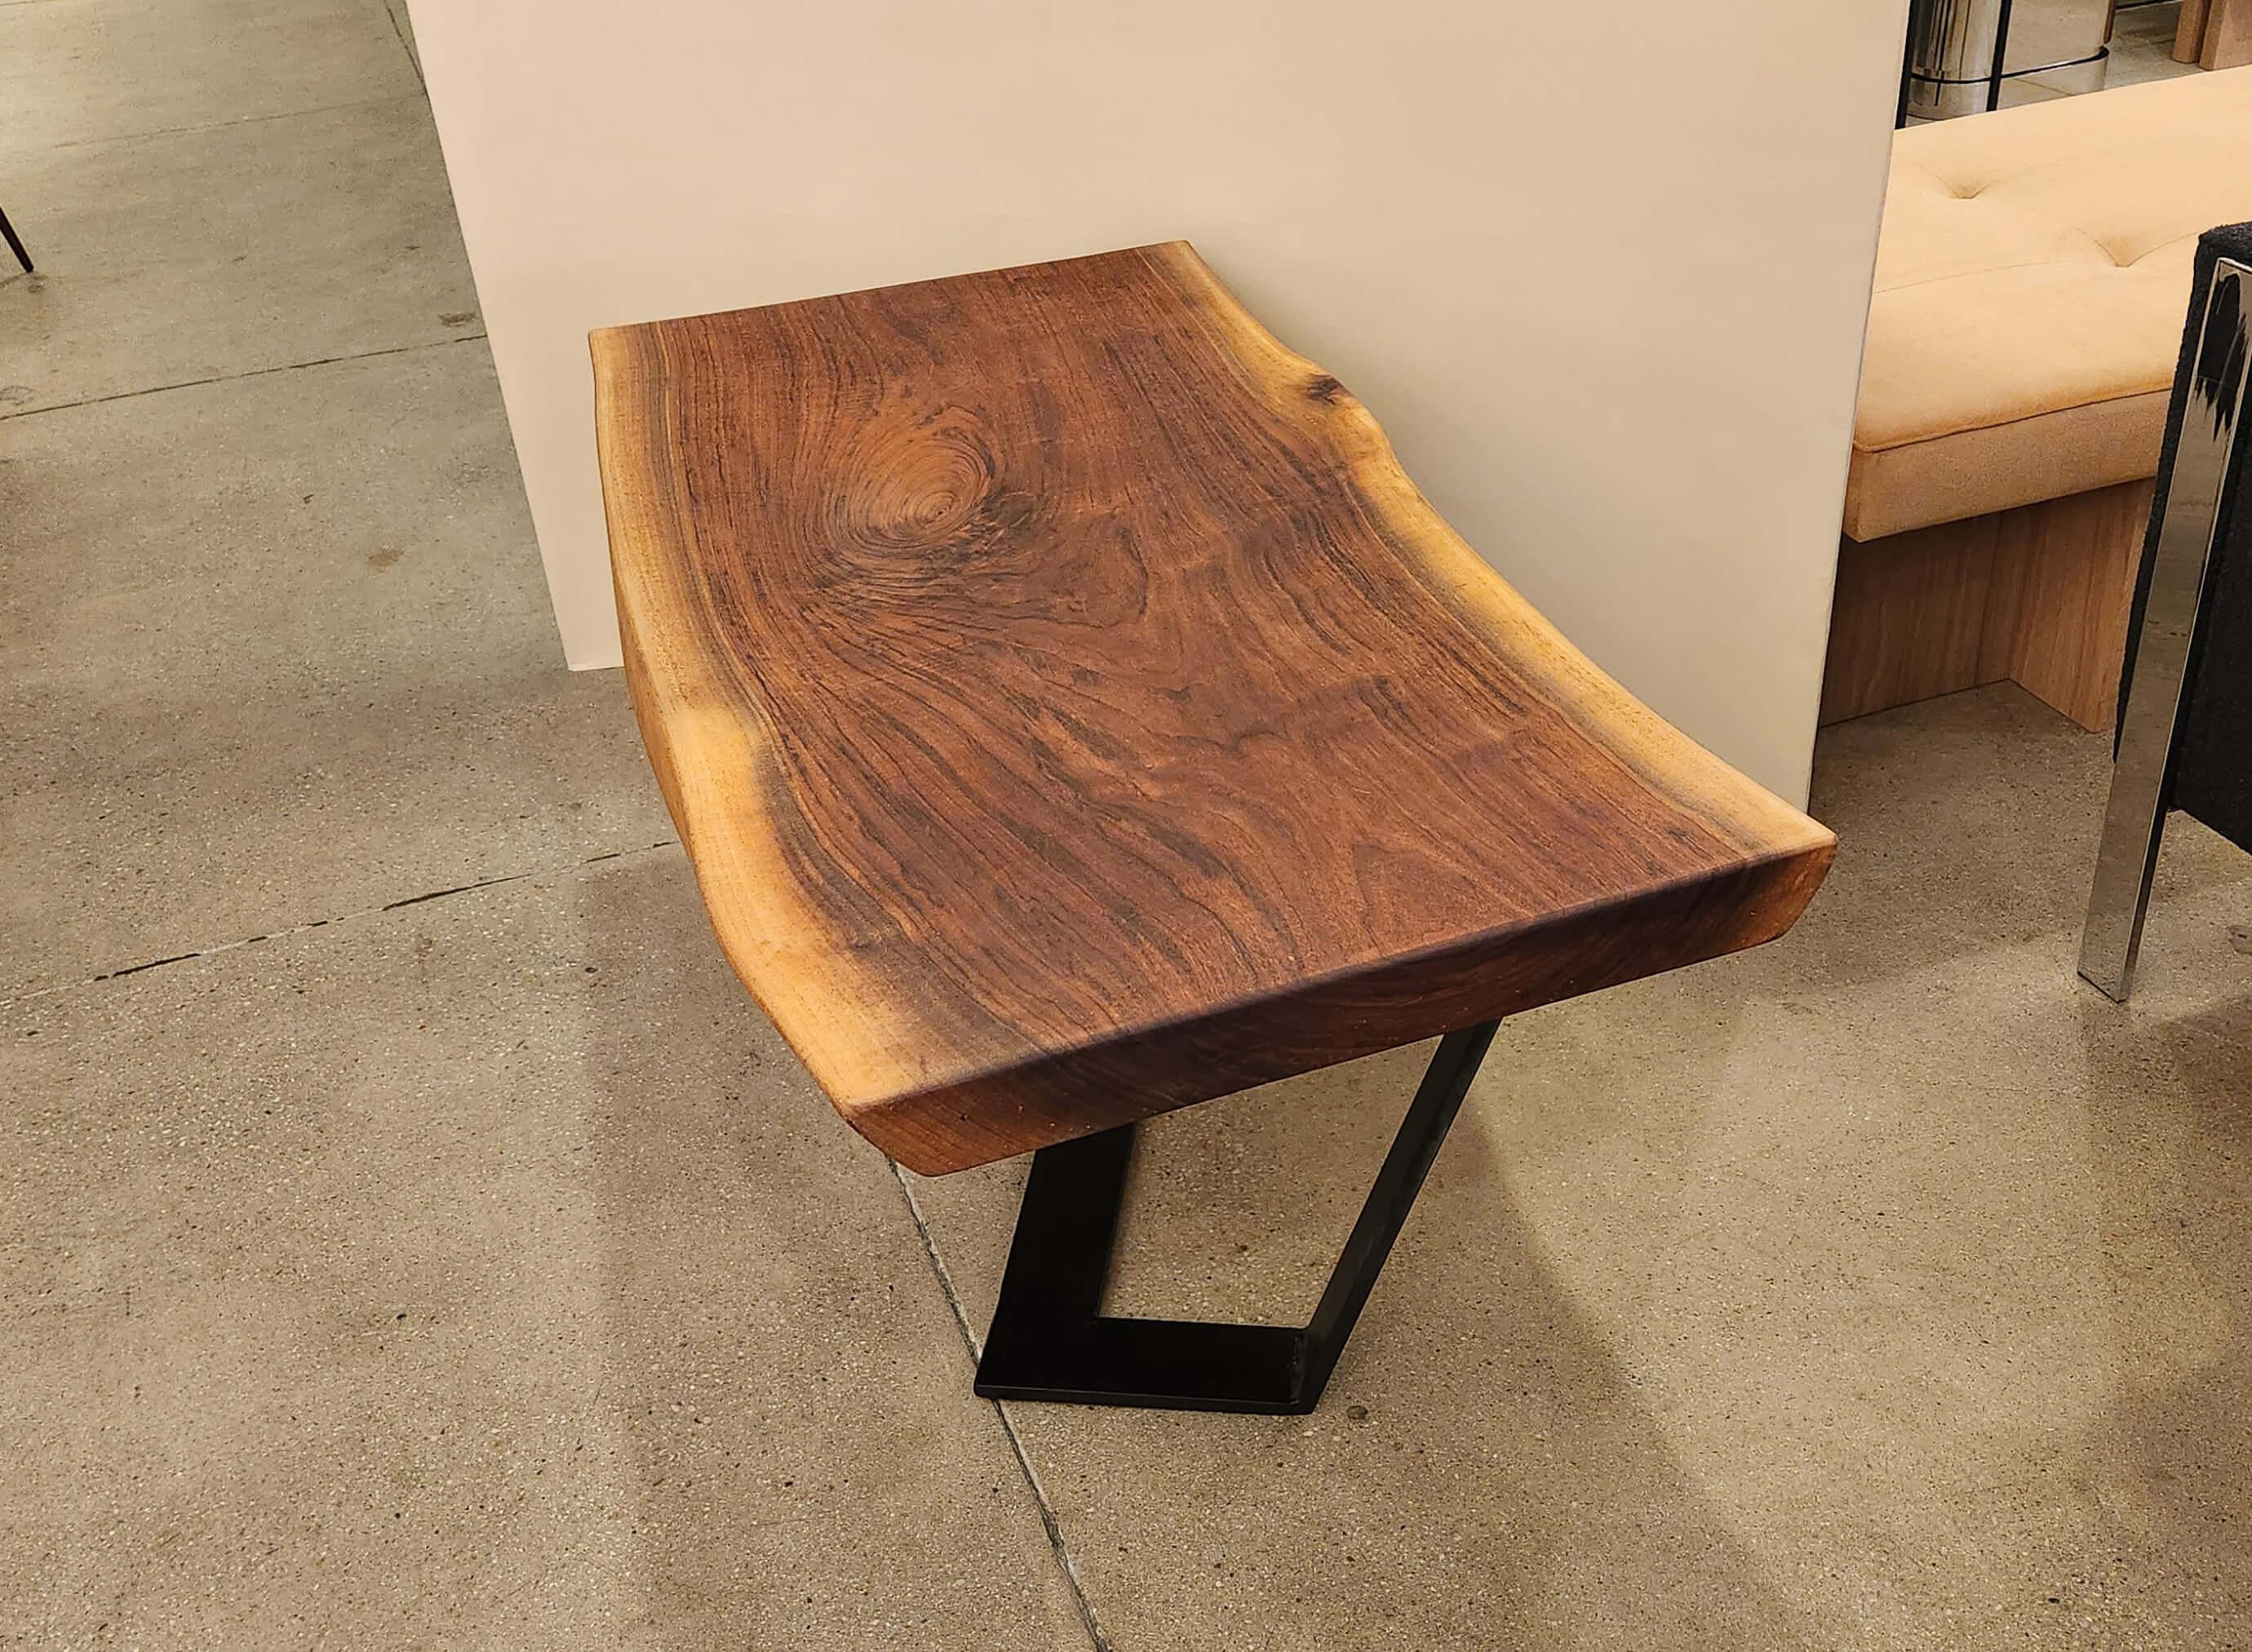 This tall walnut slab coffee table is a unique piece that is both functional and artisanal.
 
 It was designed by Creation Therrien. It is made from Pennsylvania black walnut wood polished to a smooth finish and coated with several layers of